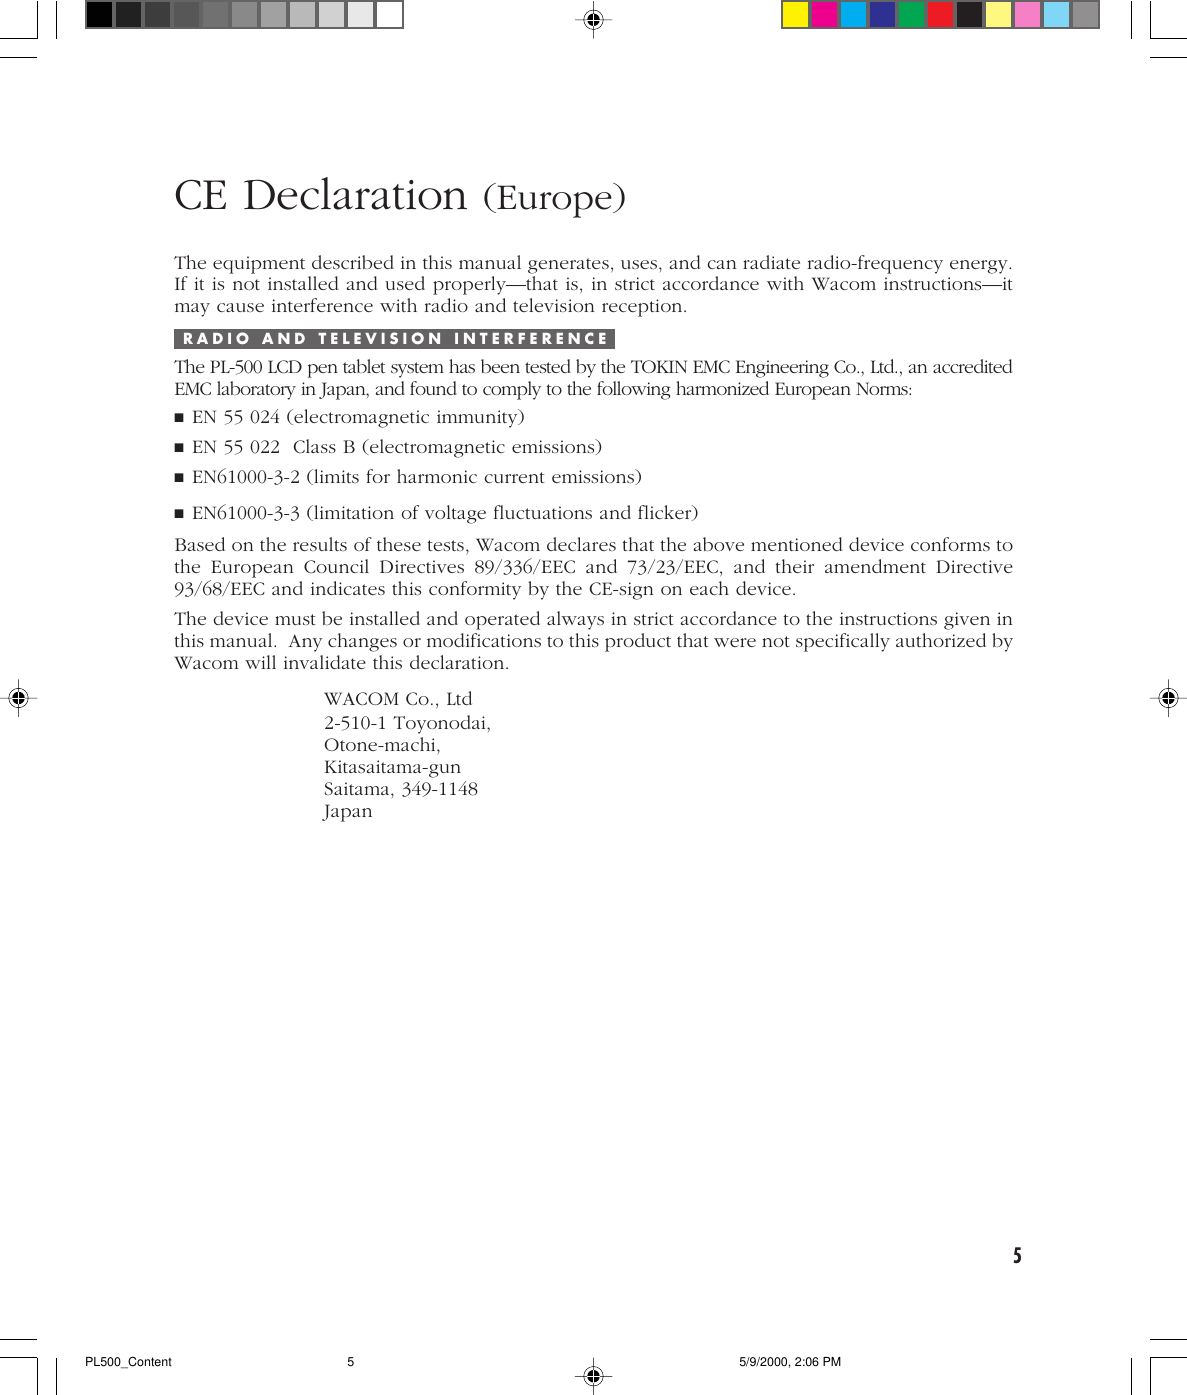 5CE Declaration (Europe)The equipment described in this manual generates, uses, and can radiate radio-frequency energy.If it is not installed and used properly—that is, in strict accordance with Wacom instructions—itmay cause interference with radio and television reception.R A D I O   A N D   T E L E V I S I O N   I N T E R F E R E N C EThe PL-500 LCD pen tablet system has been tested by the TOKIN EMC Engineering Co., Ltd., an accreditedEMC laboratory in Japan, and found to comply to the following harmonized European Norms:■EN 55 024 (electromagnetic immunity)■EN 55 022  Class B (electromagnetic emissions)■EN61000-3-2 (limits for harmonic current emissions)■EN61000-3-3 (limitation of voltage fluctuations and flicker)Based on the results of these tests, Wacom declares that the above mentioned device conforms tothe European Council Directives 89/336/EEC and 73/23/EEC, and their amendment Directive93/68/EEC and indicates this conformity by the CE-sign on each device.The device must be installed and operated always in strict accordance to the instructions given inthis manual.  Any changes or modifications to this product that were not specifically authorized byWacom will invalidate this declaration.WACOM Co., Ltd2-510-1 Toyonodai,Otone-machi,Kitasaitama-gunSaitama, 349-1148JapanPL500_Content 5/9/2000, 2:06 PM5